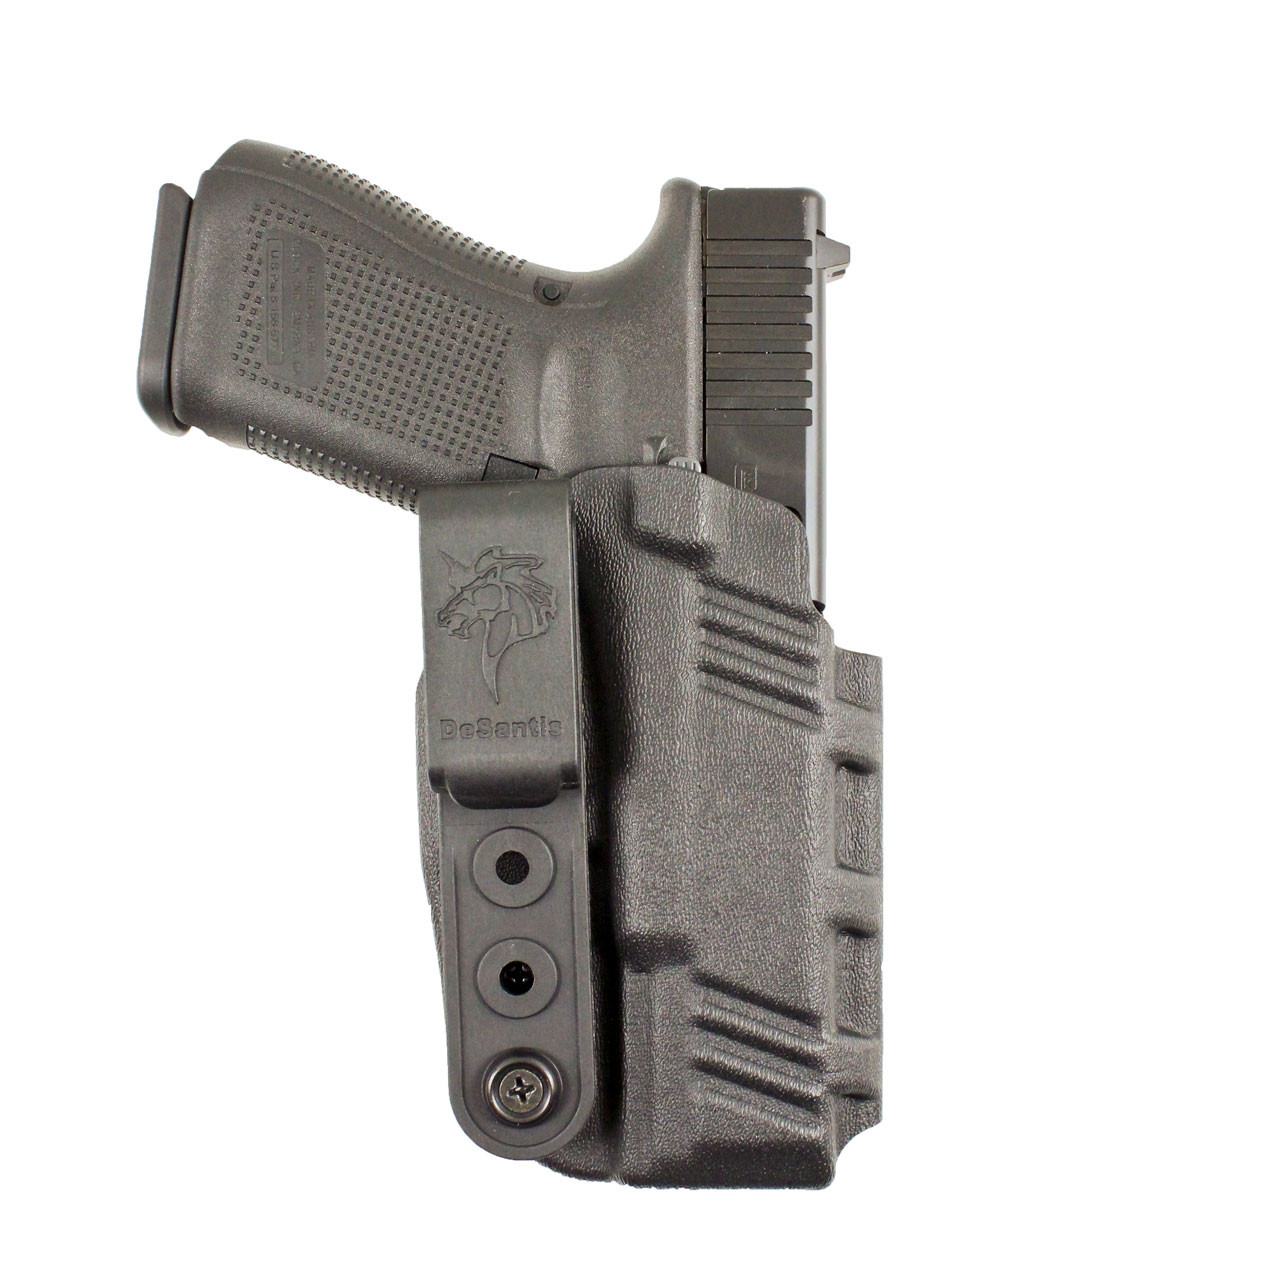 MF Tactical Holsters - Custom kydex holsters Puerto Rico - Gun Holsters -  Custom Gun Holsters